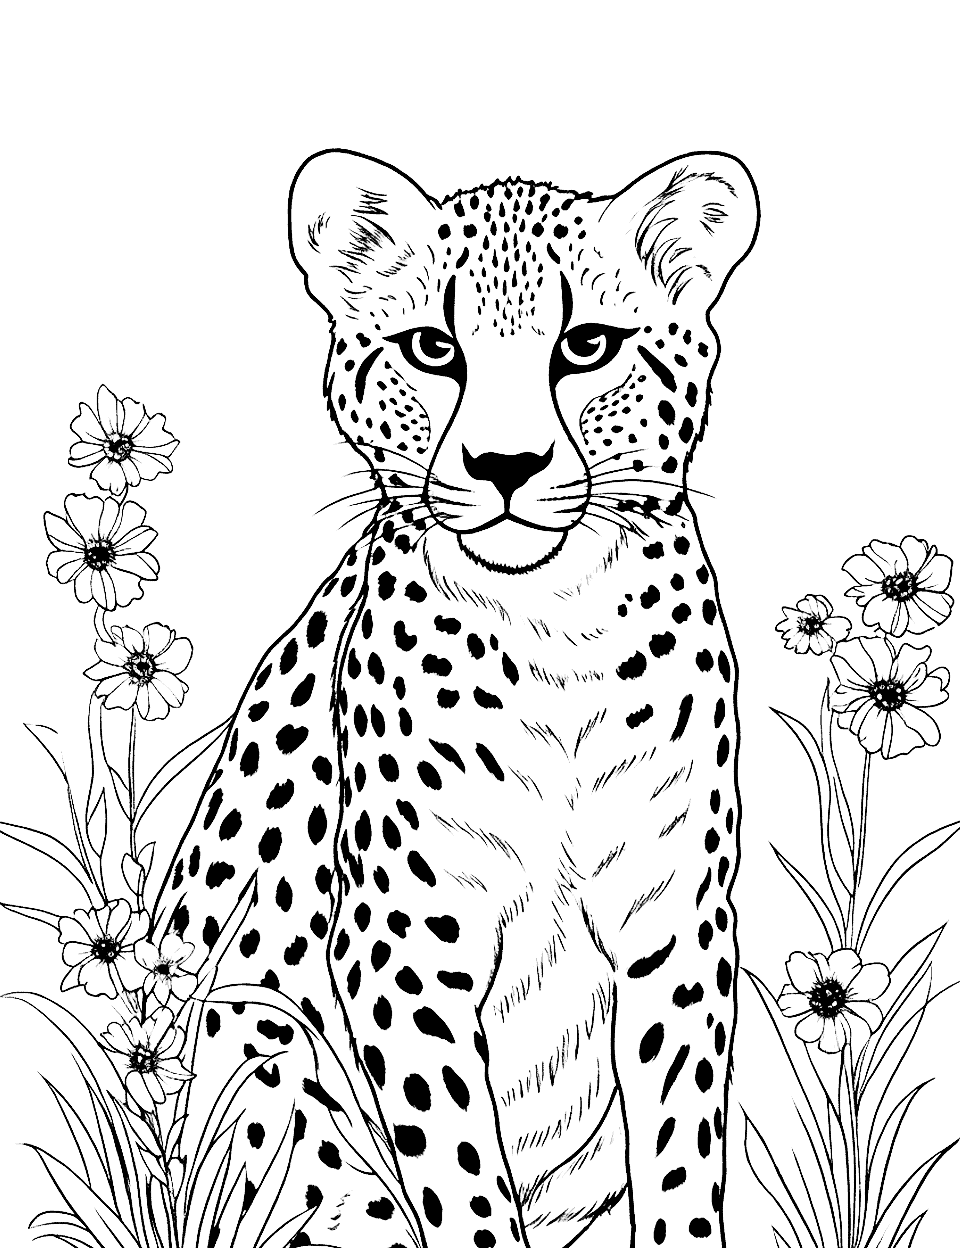 Cheetah in a Flowery Field Coloring Page - A cheetah in a field of flowers, looking peaceful.